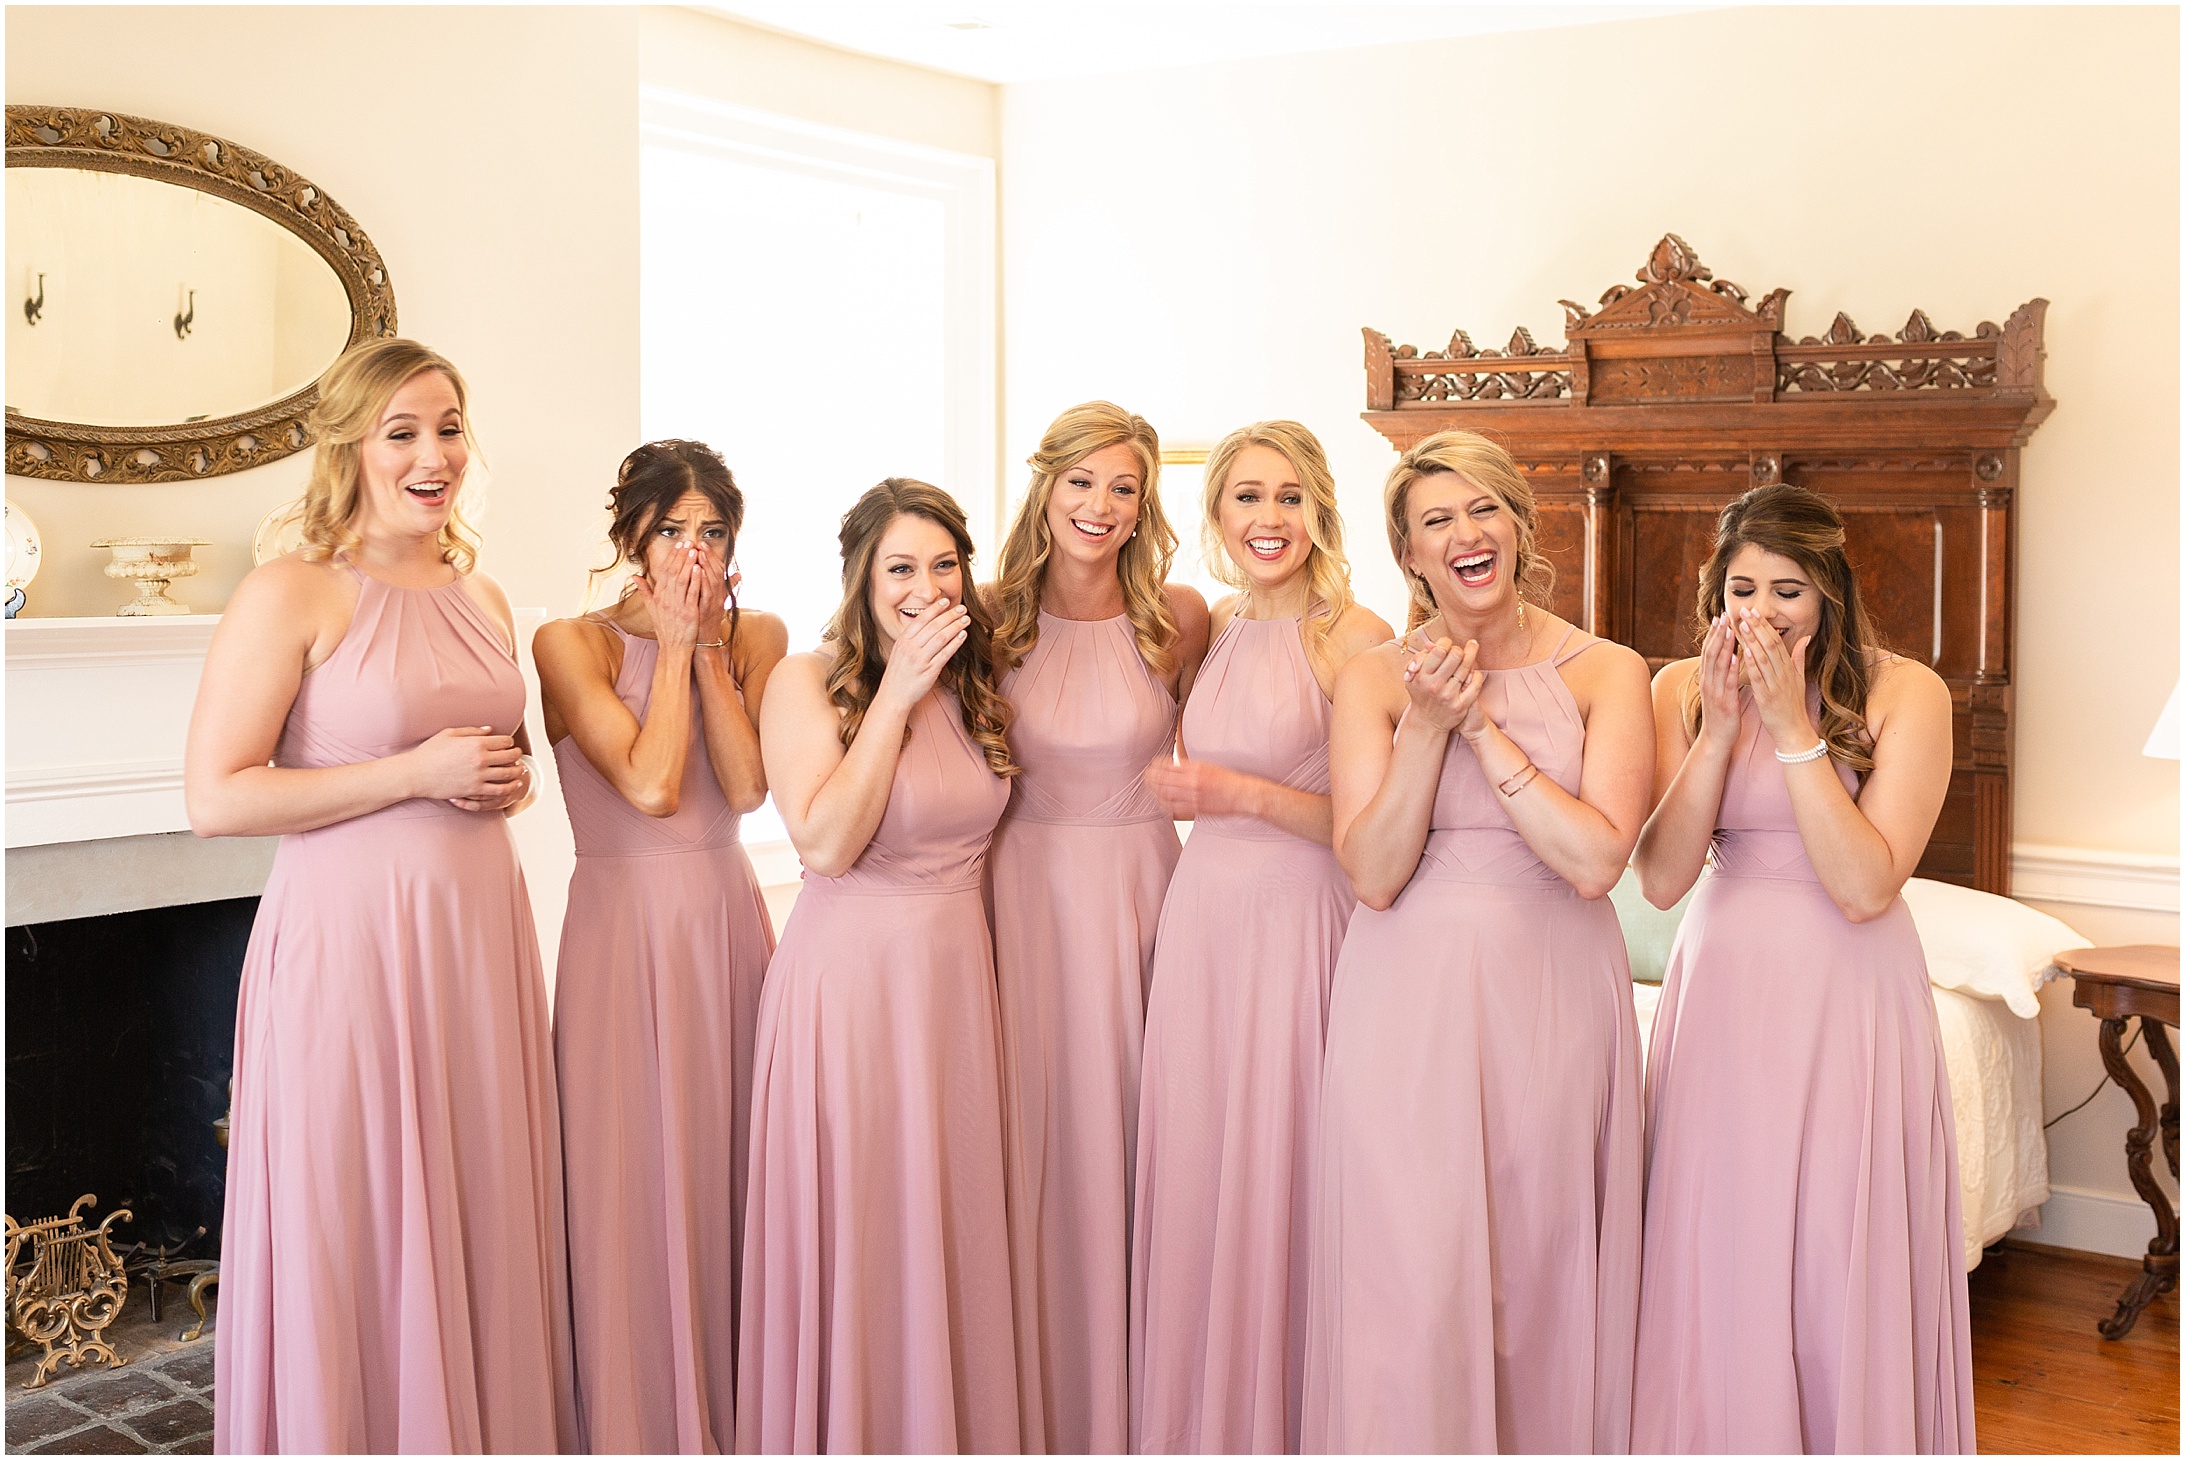  Leslie's bridesmaids' had the BEST reaction to seeing Leslie in her dress! 